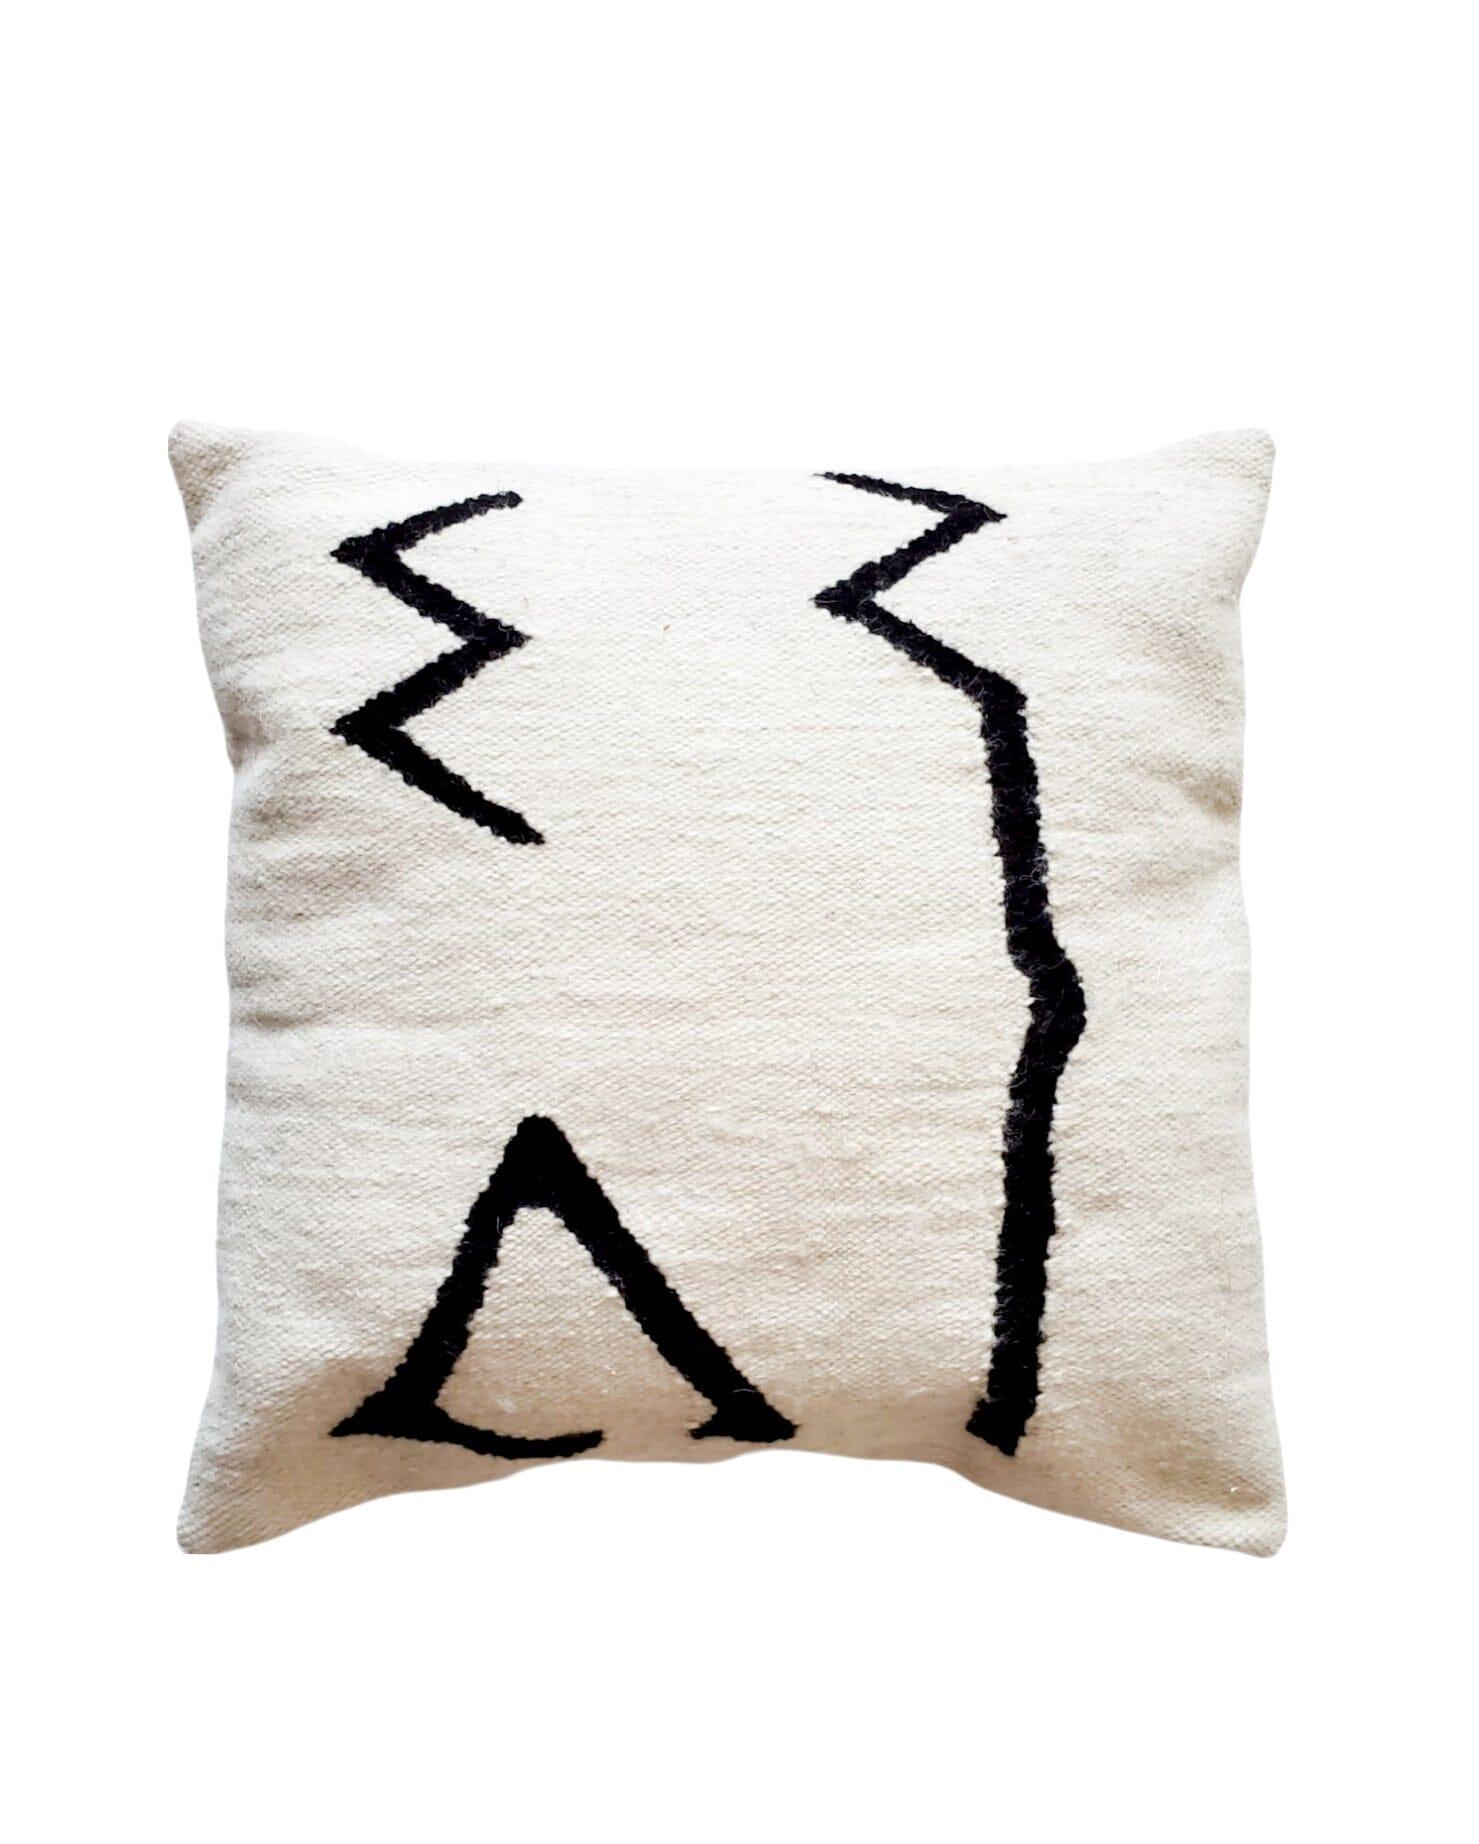 Hand-Woven Black and Cream Zella Wool PIllow Cover For Sale